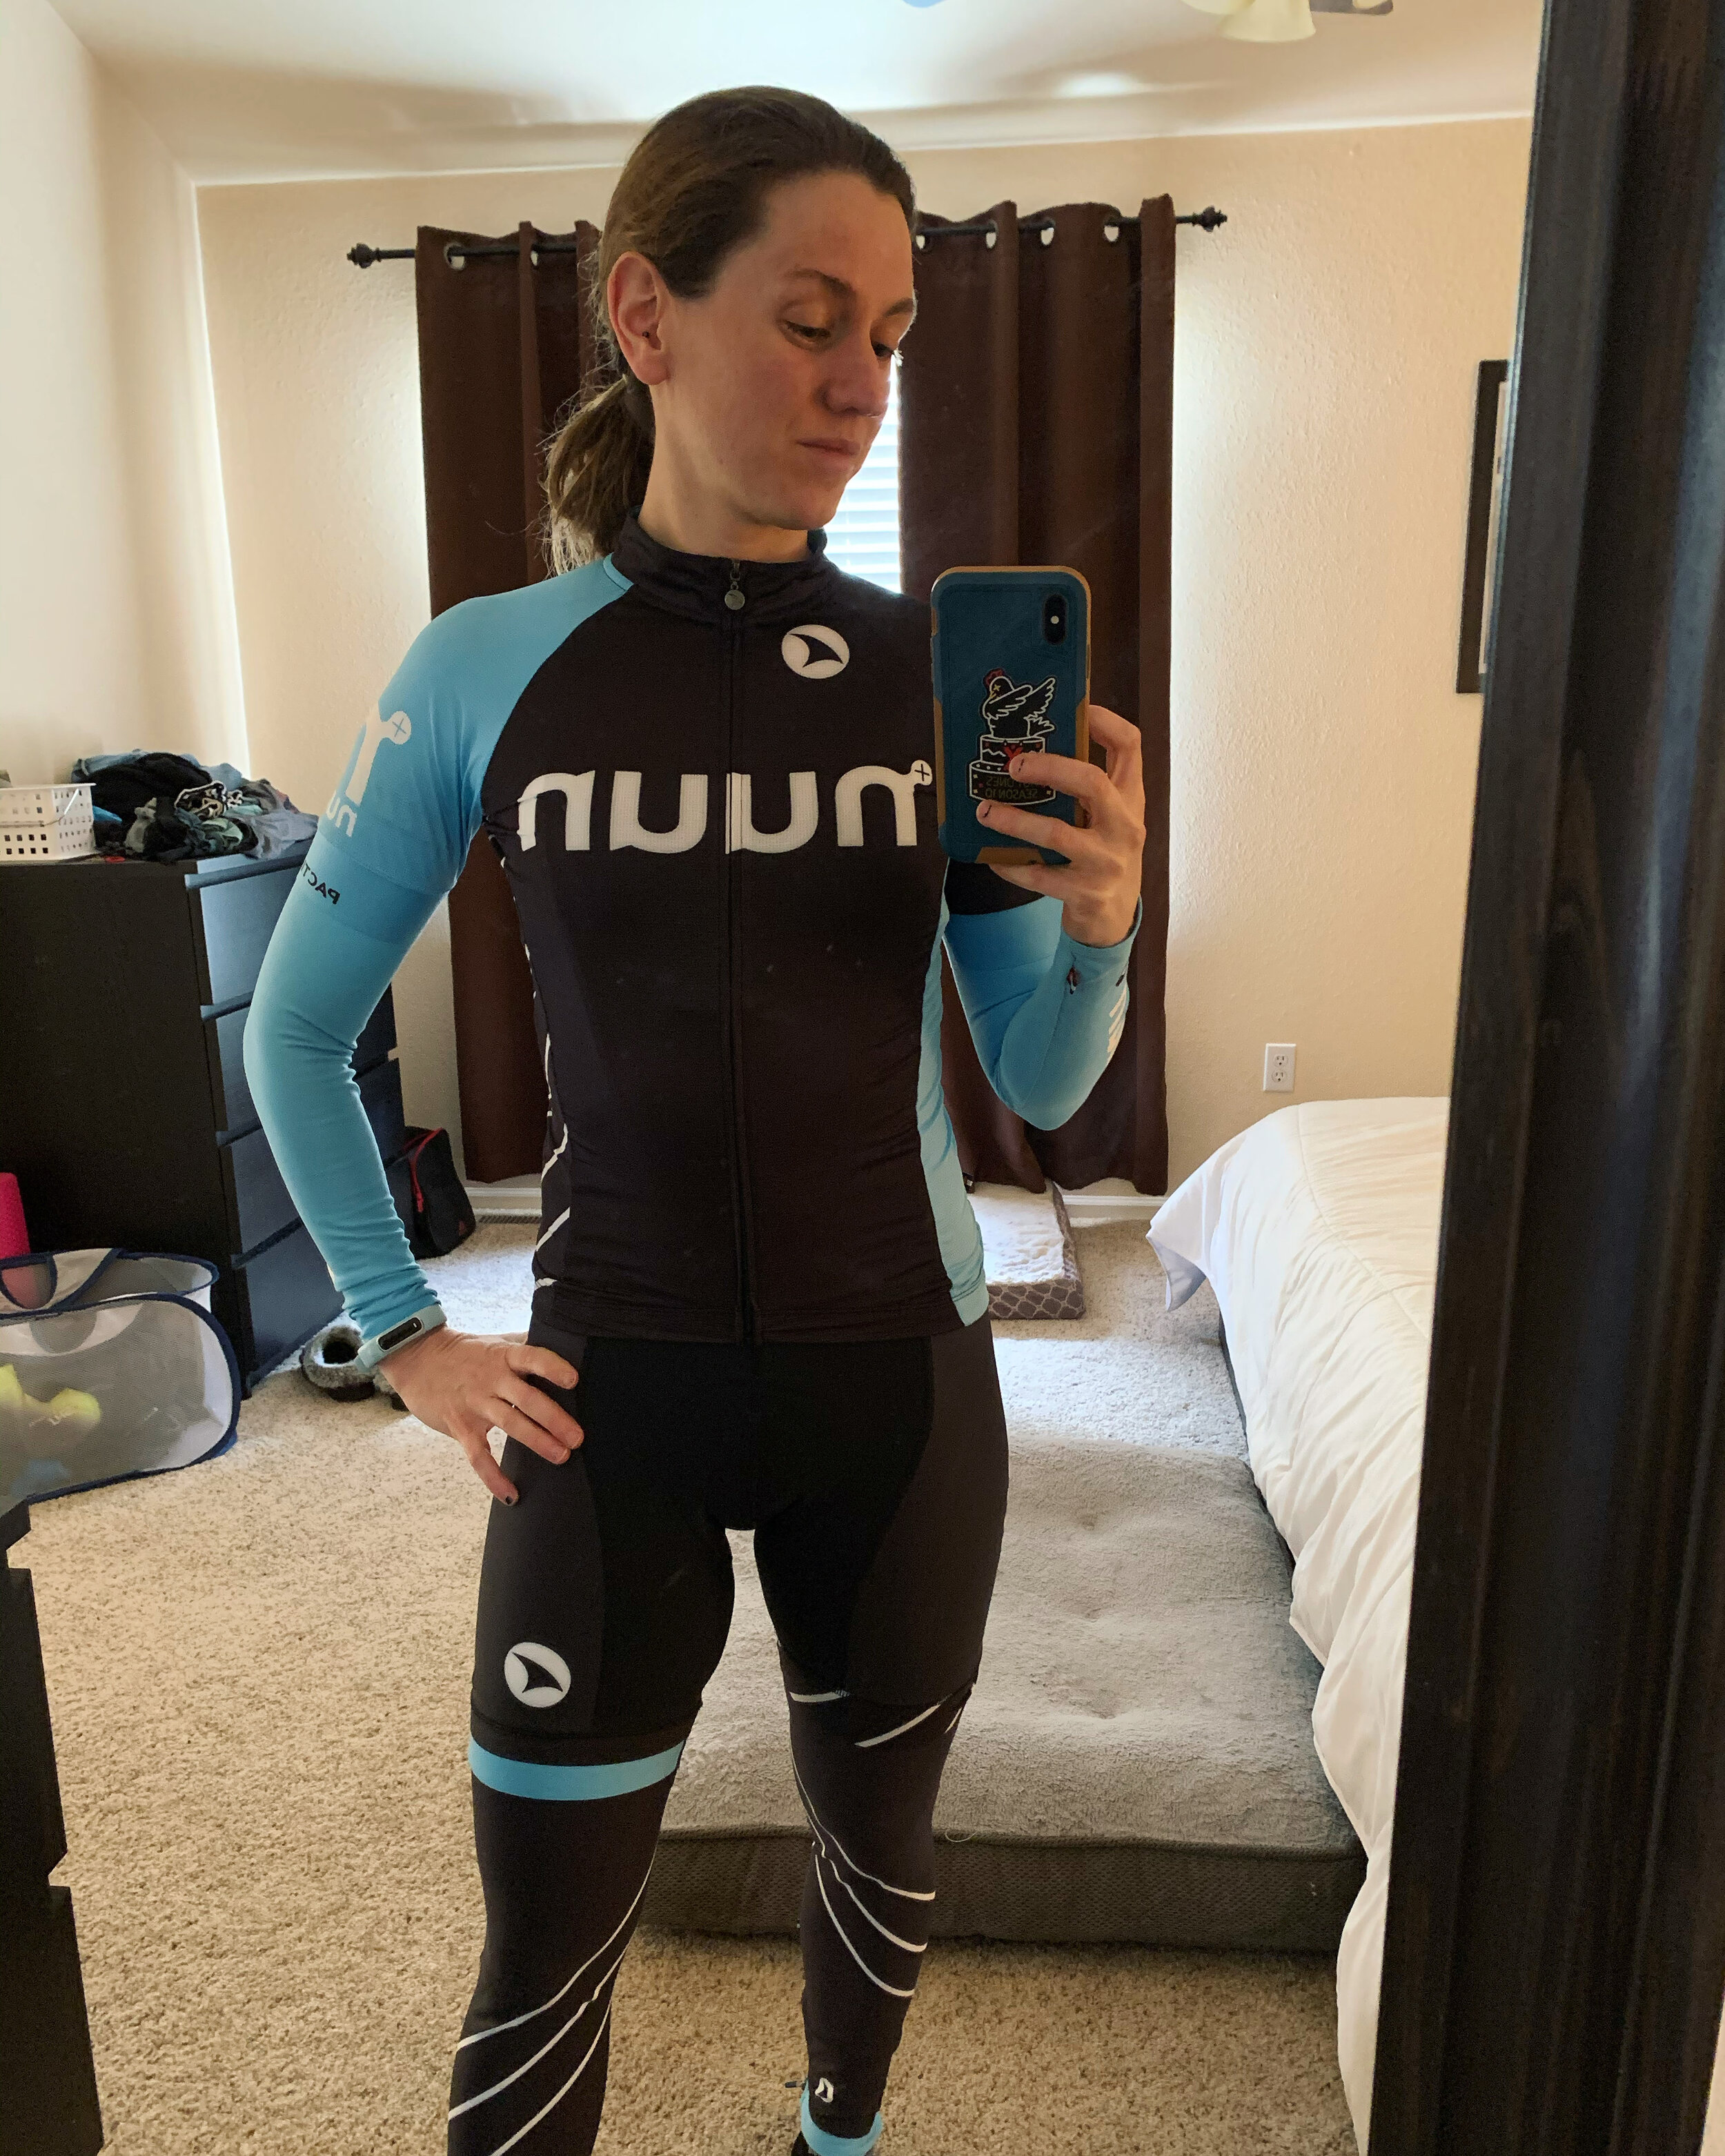 First real cycling kit